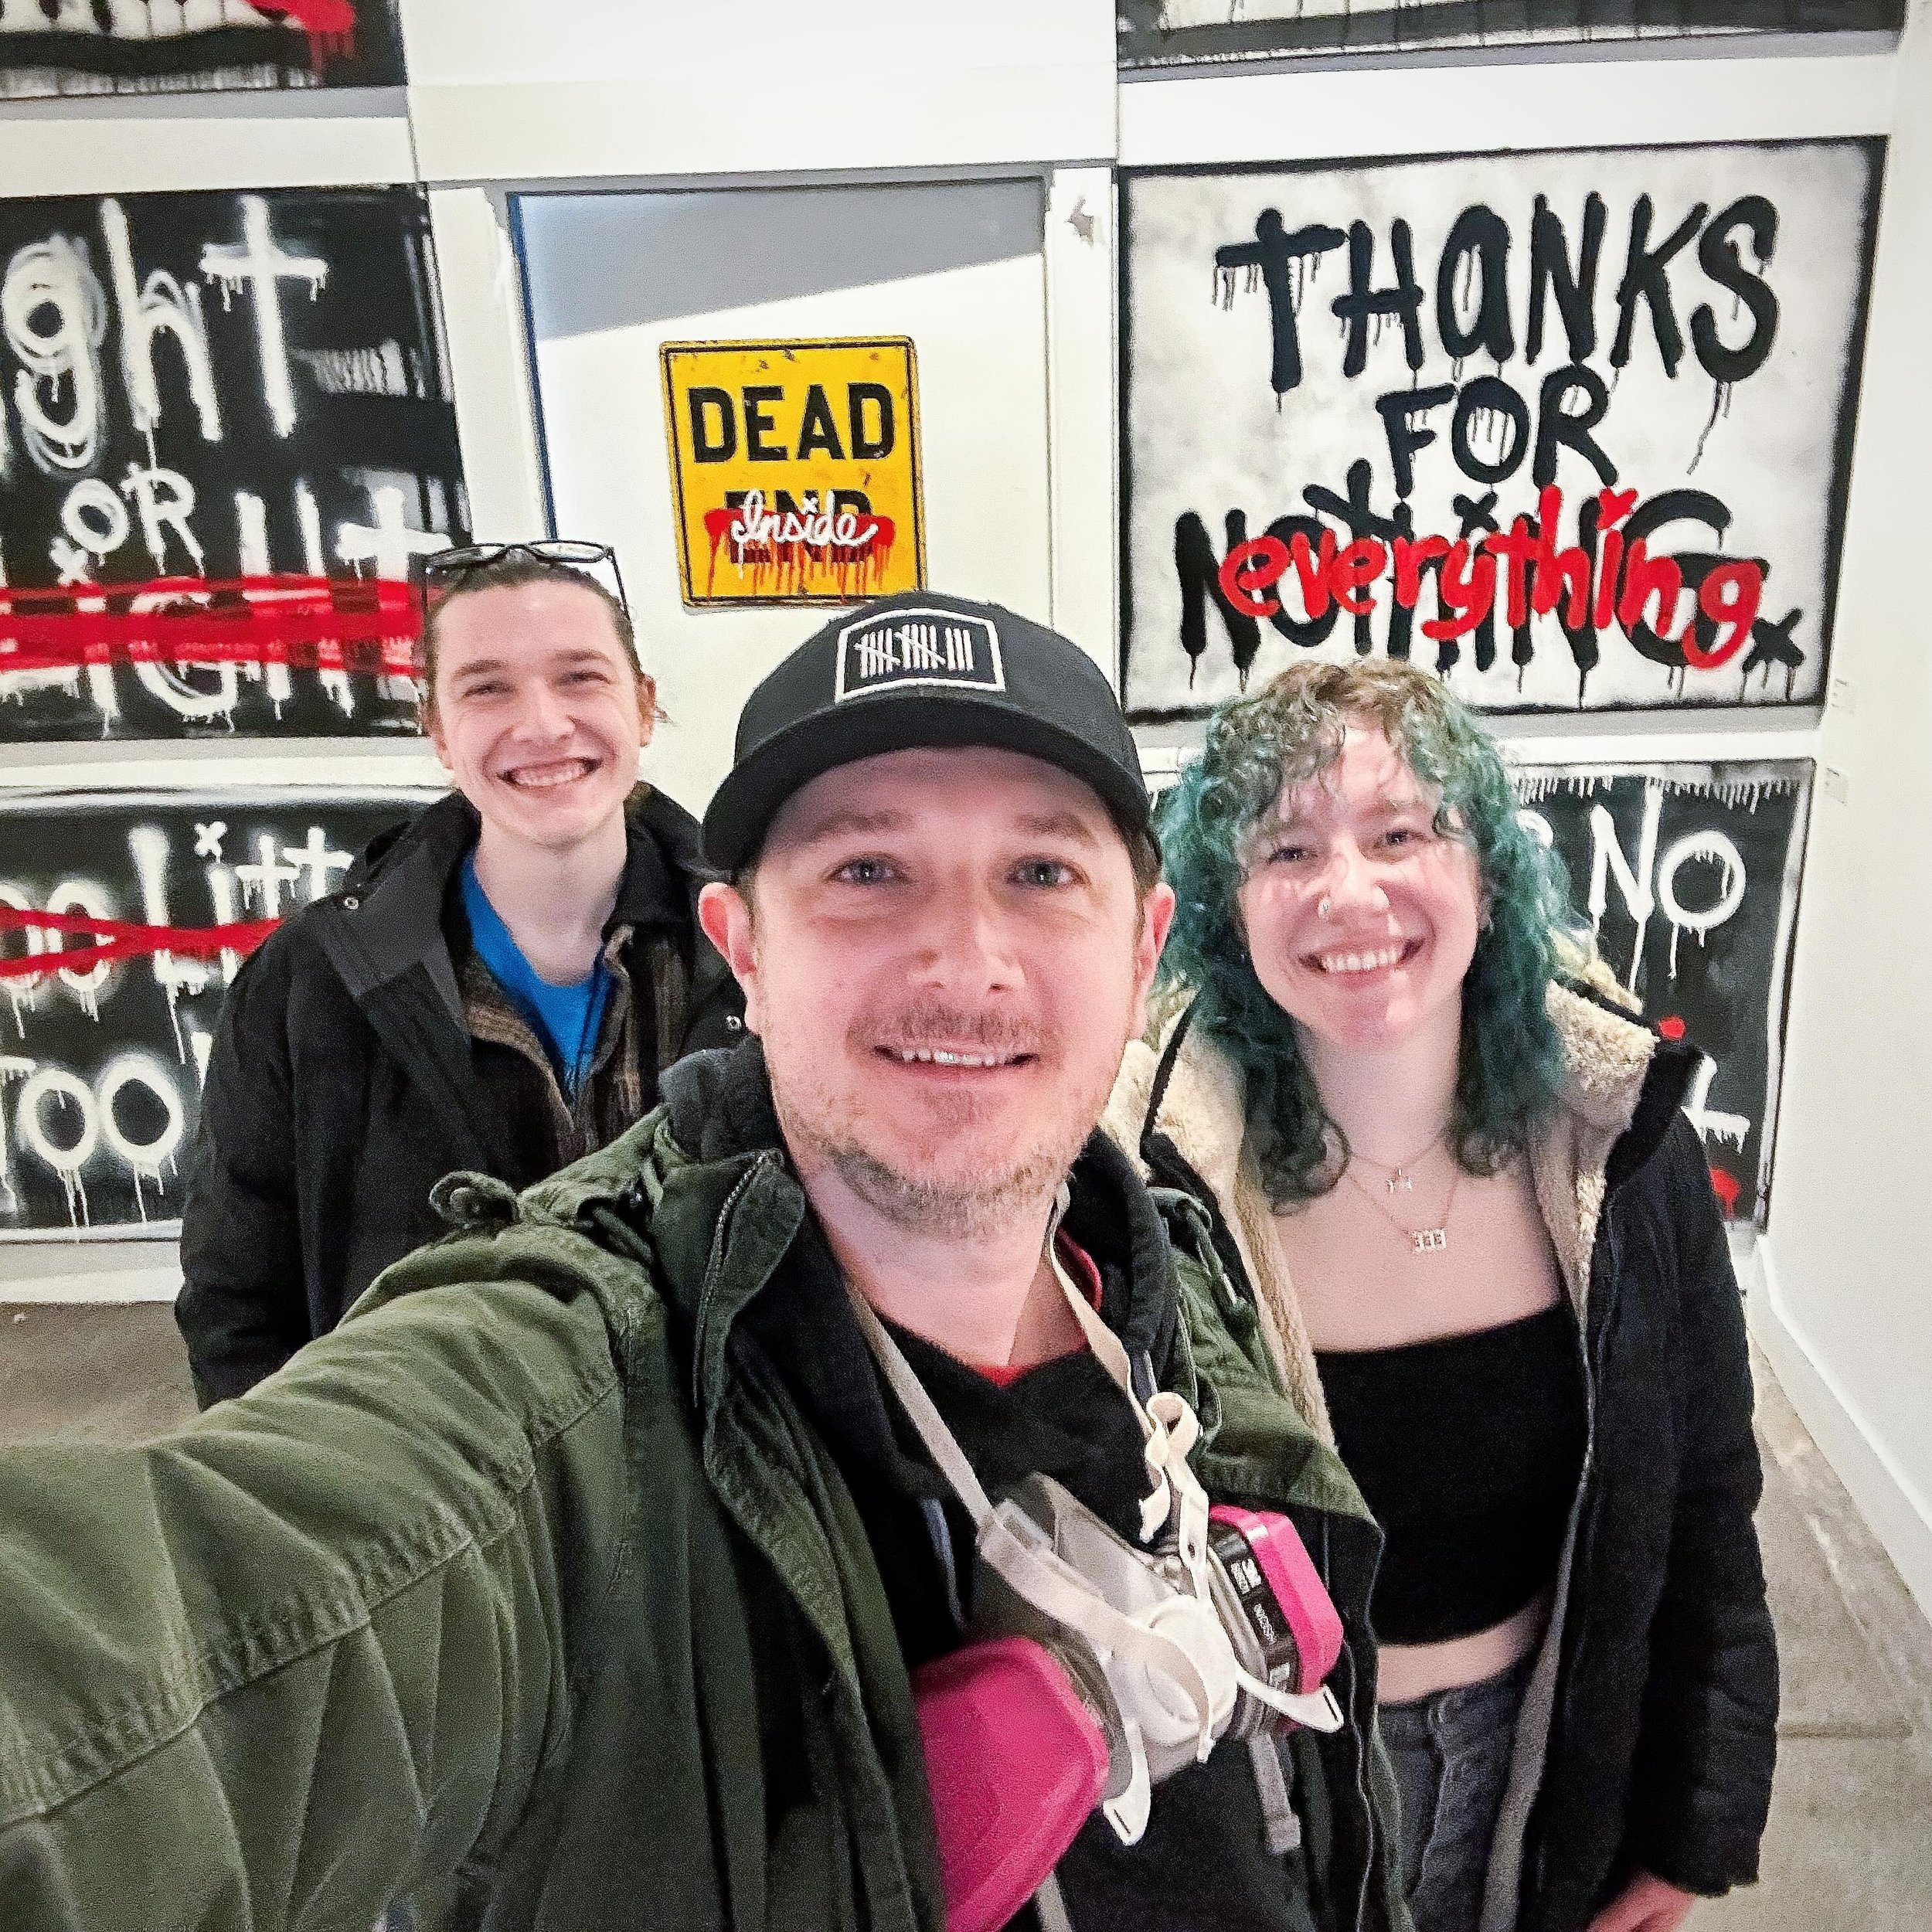 Quick selfie from a gallery tour last week. Thanks for stopping by!

To set up a tour check out theczartgallery.com 

#artgallery #gallery #galleryvisit #artspace #arttour #gallerytour #czartgallery #robczar #artistgallery #avlart #avlartist #avlloca